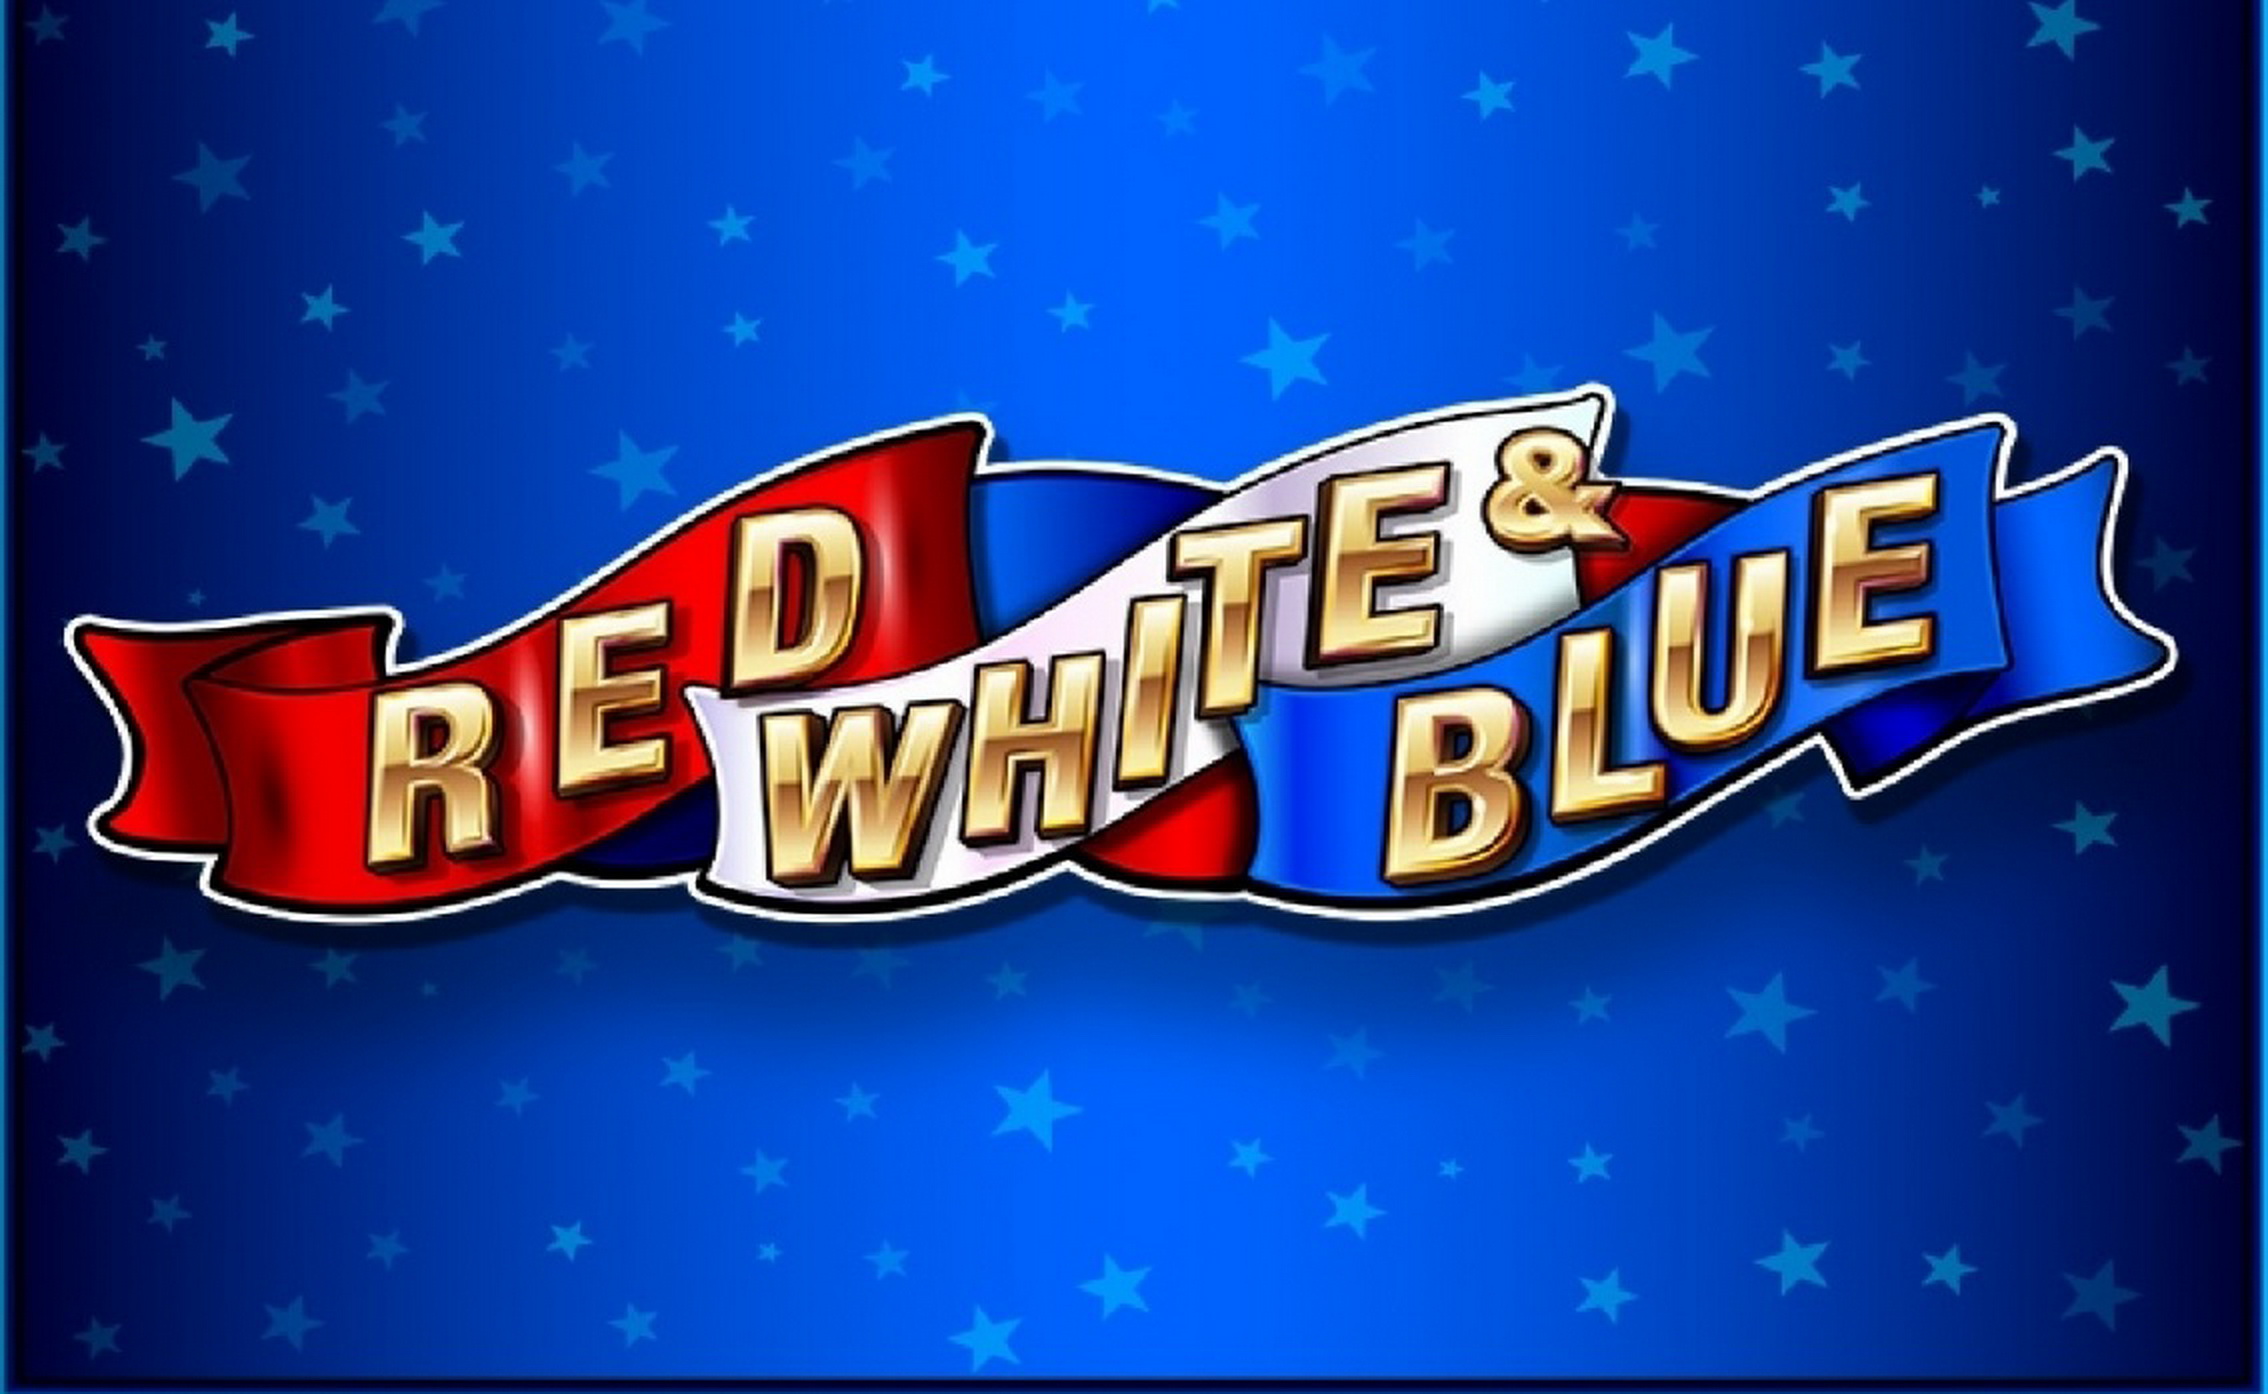 Red White Blue 3 Lines demo